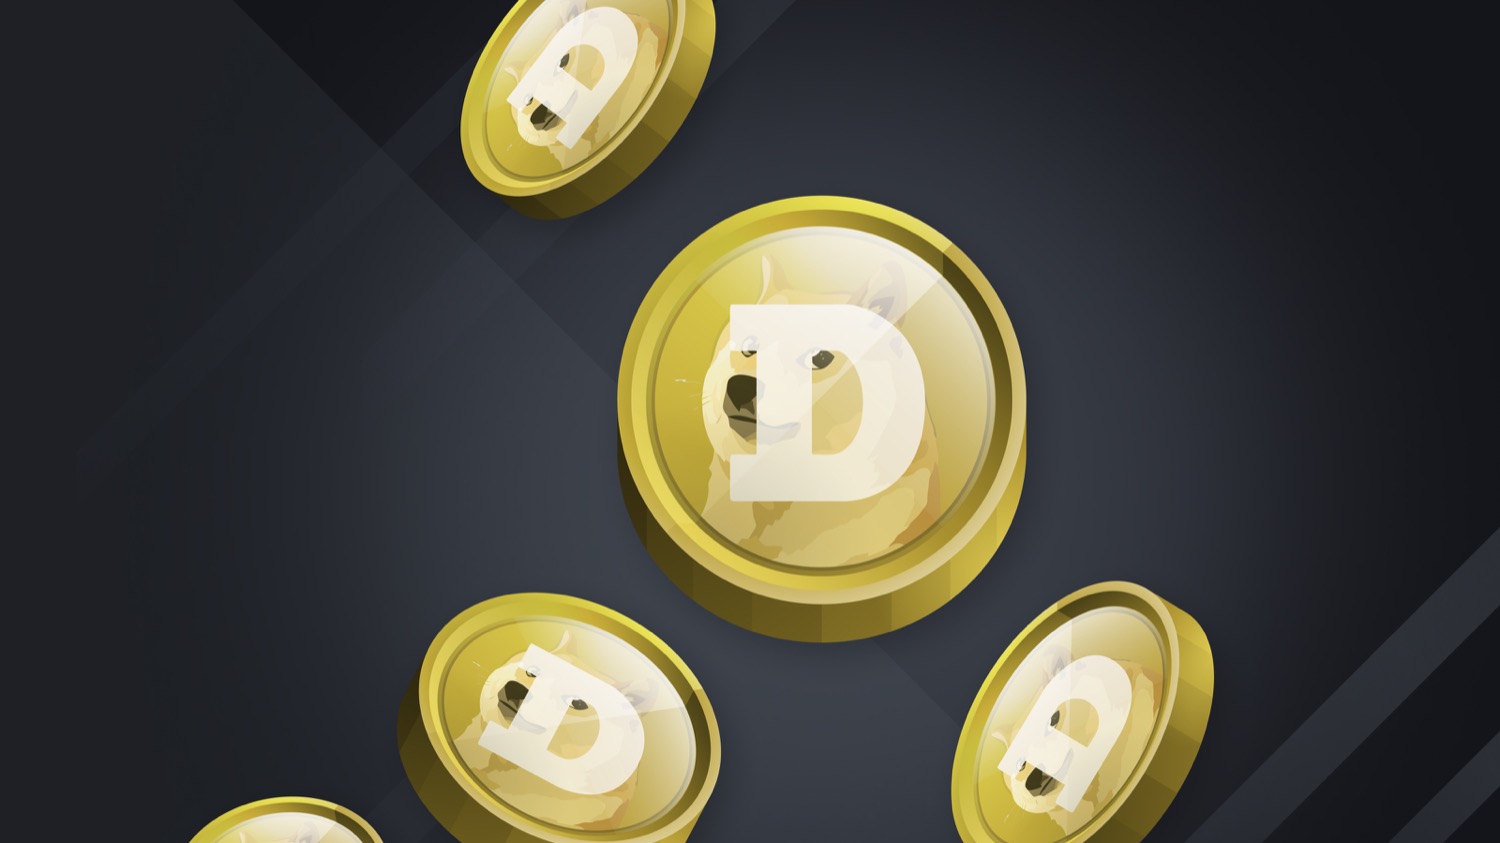 All About Dogecoin (DOGE)